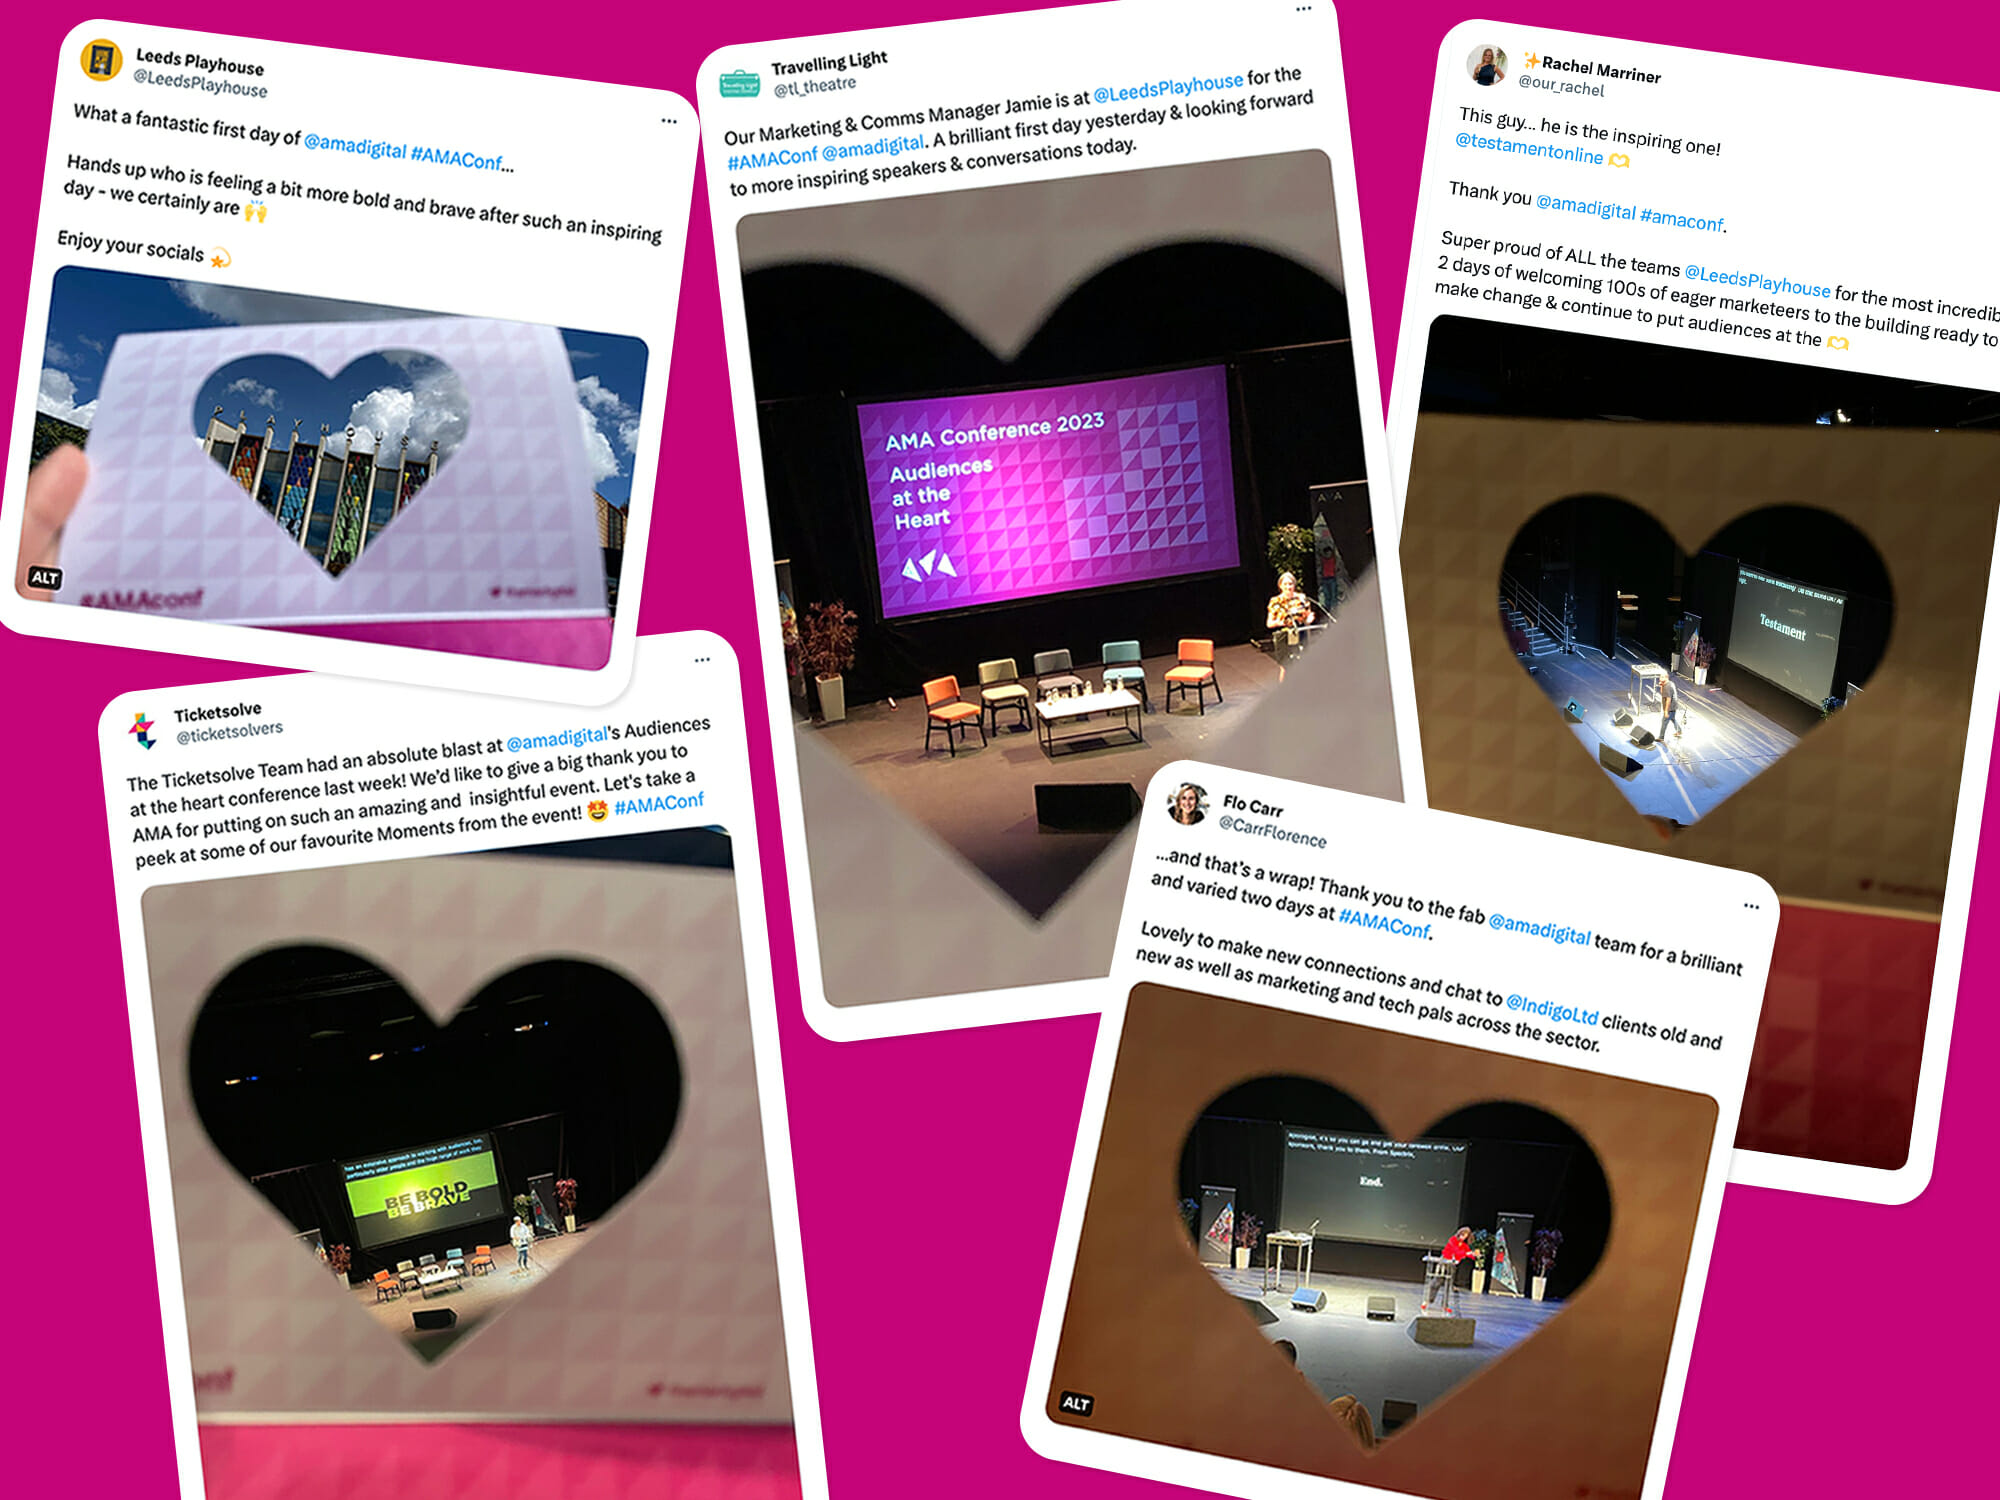 A collage of screenshots from Twitter are displayed overlapping each other on a pink background. They depict various social media posts with images taken at the AMA conference, each framed within a love heart. 